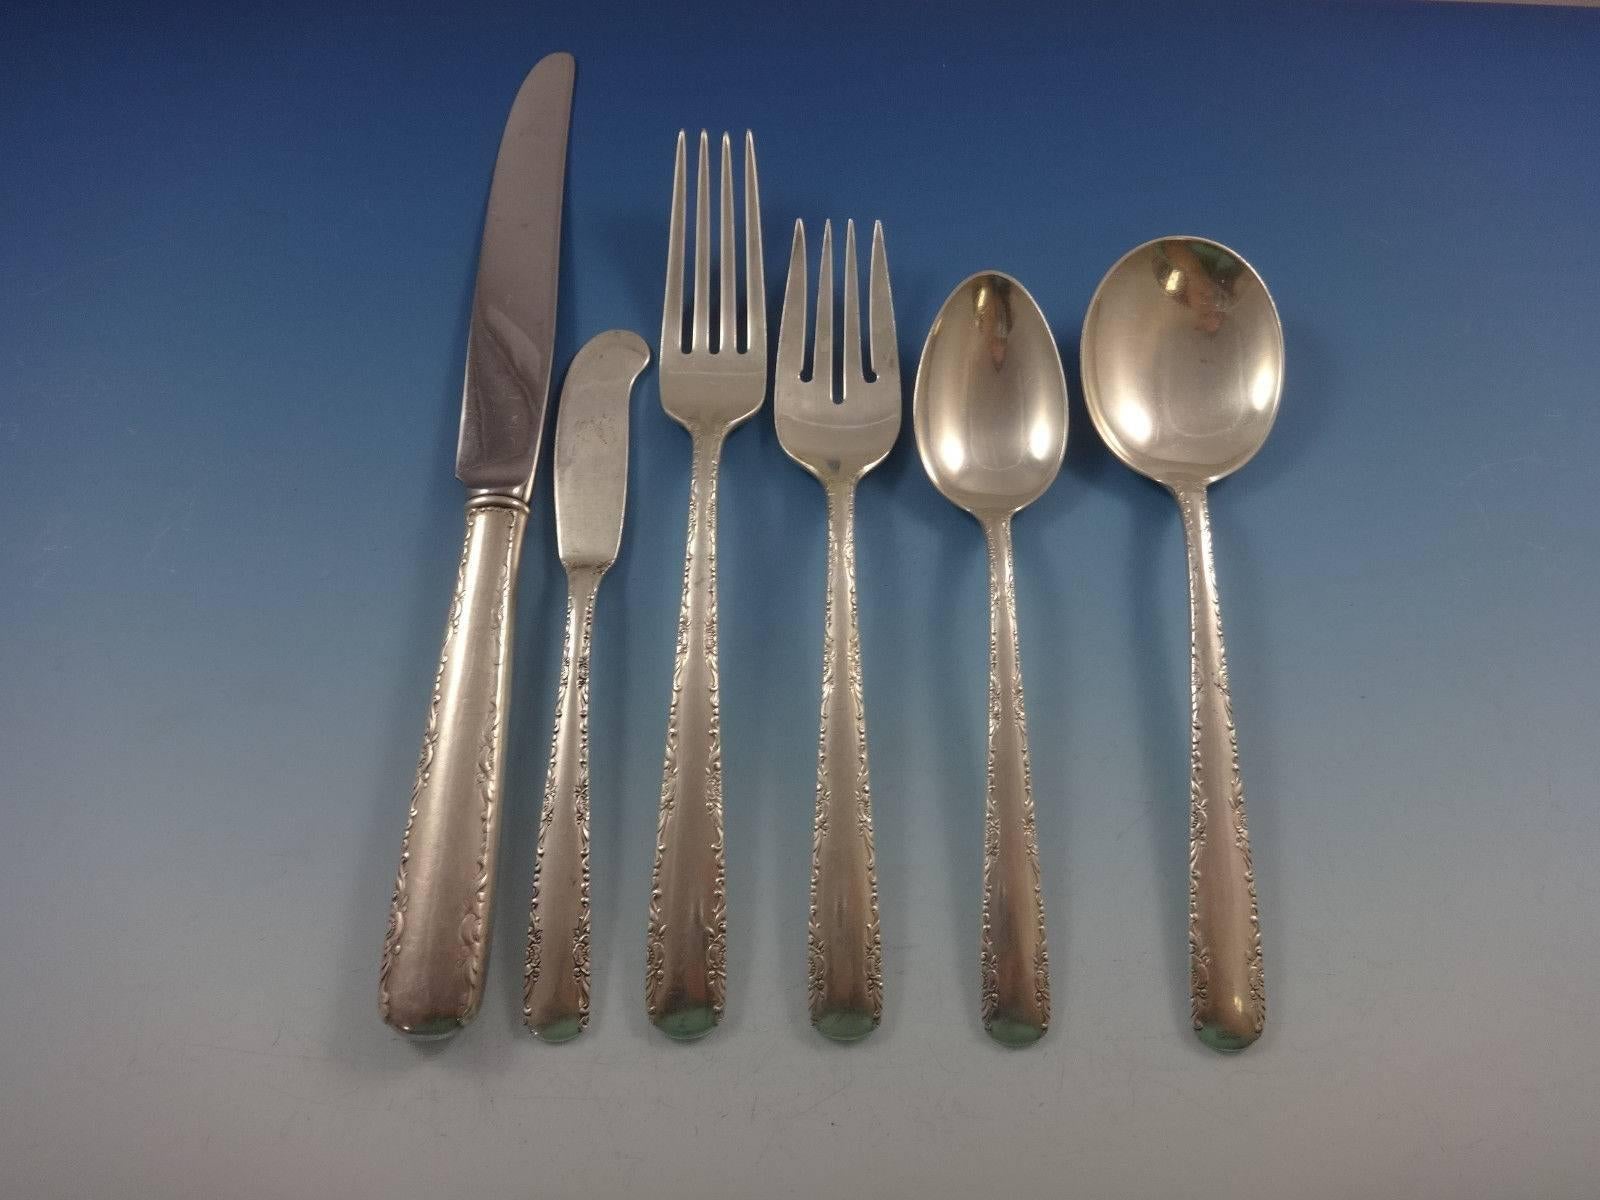 Camellia by Gorham sterling silver flatware set, 49 pieces. This set includes:

Eight knives, 8 3/4